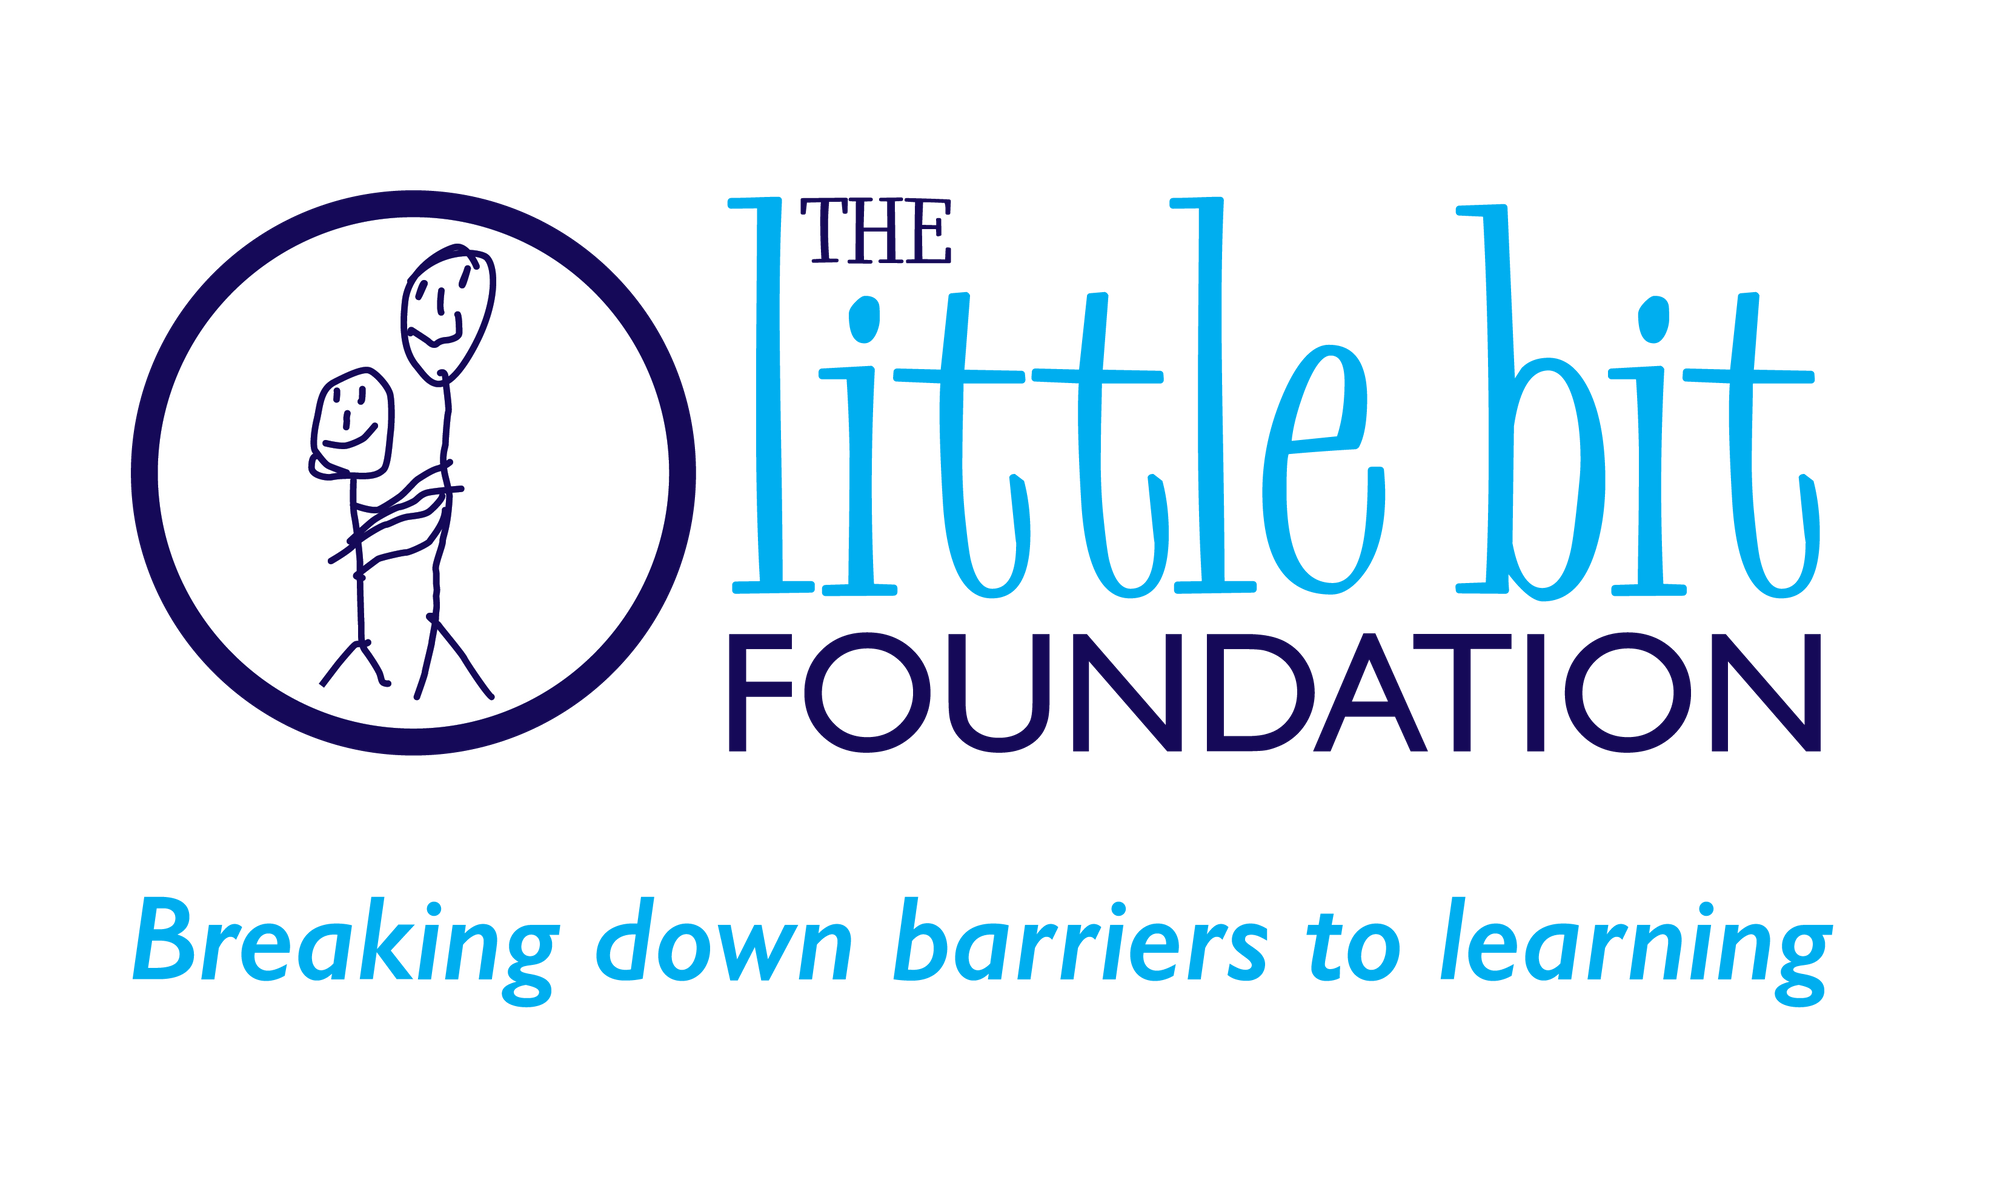 Join Us on Feb. 25 in Support of The Little Bit Foundation!